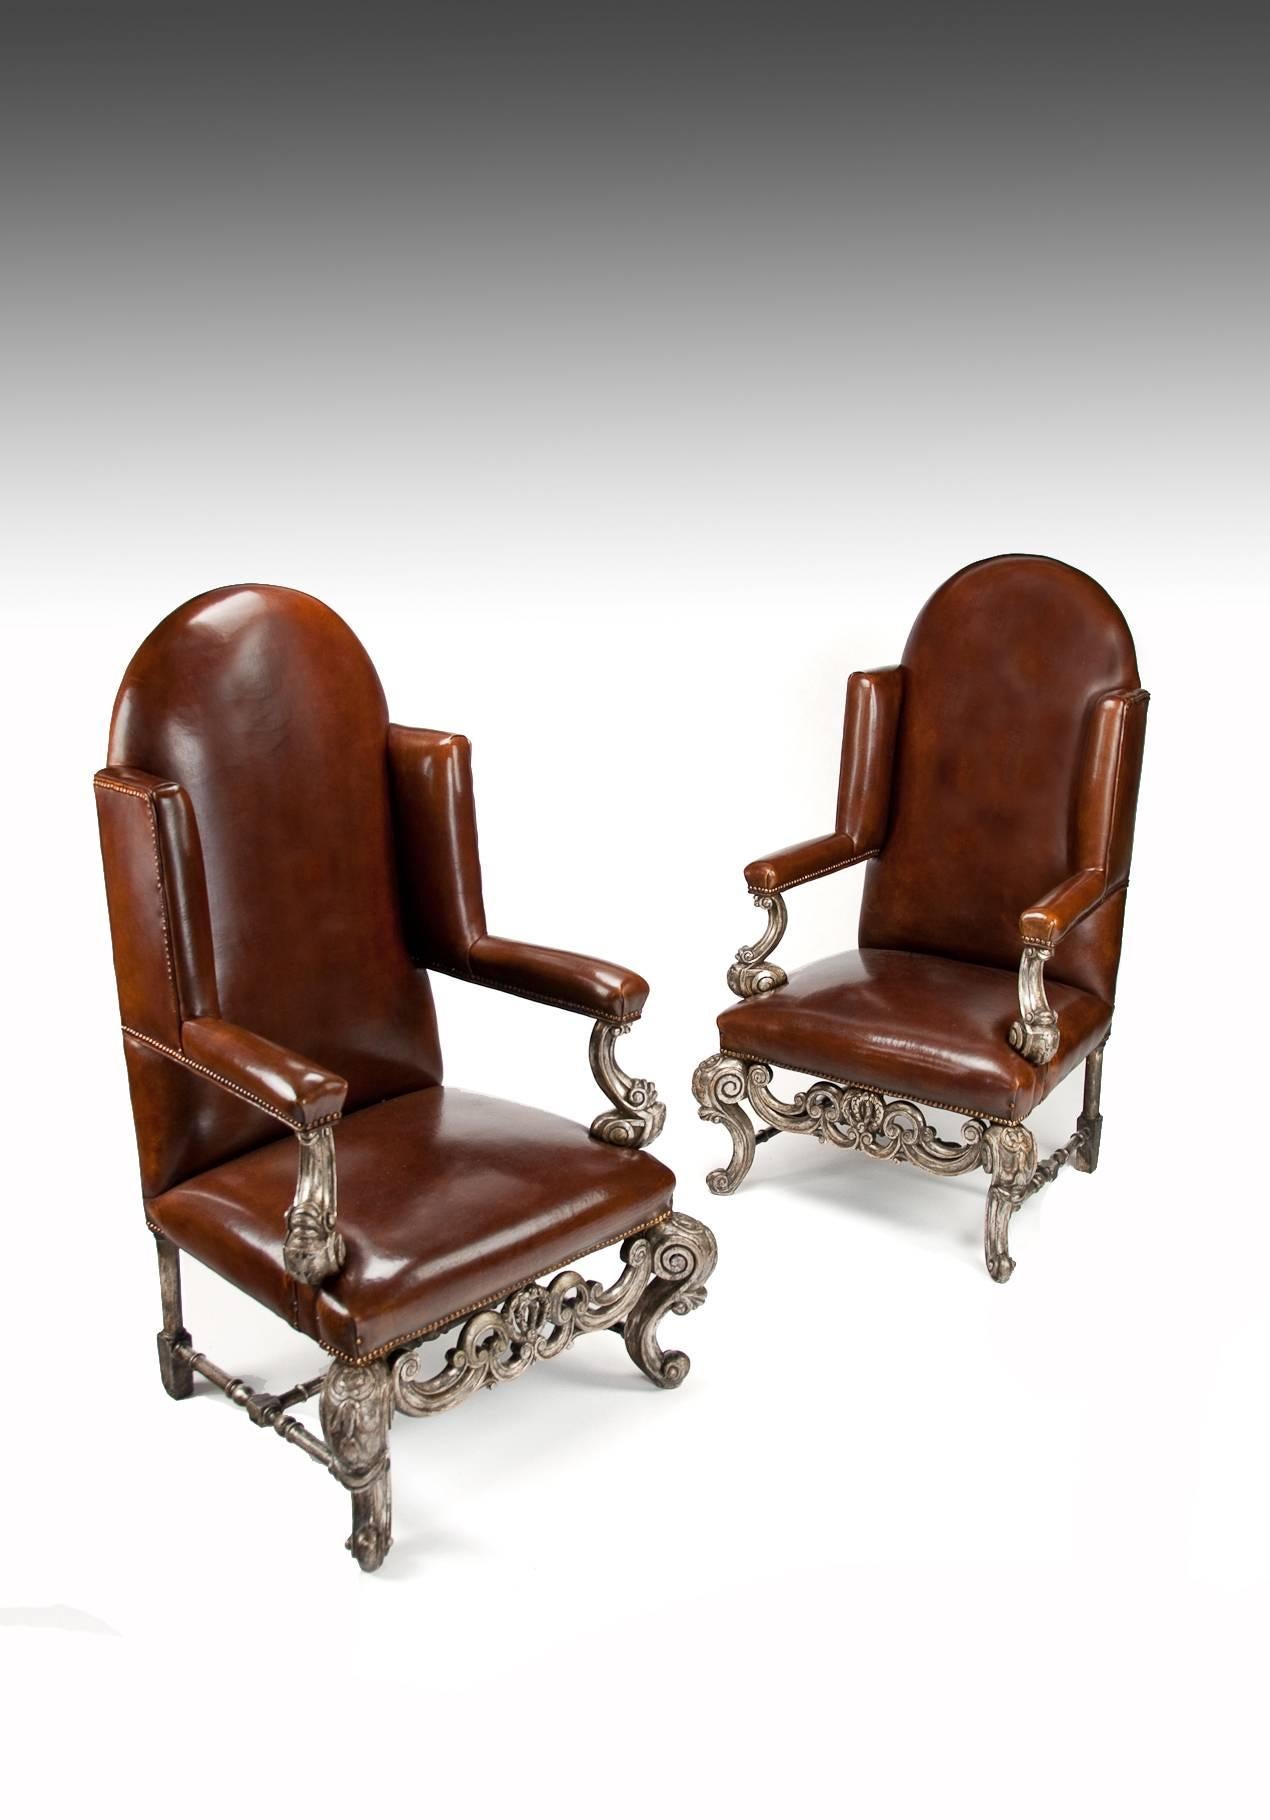 A very unusual and good quality pair of silver gilt leather upholstered wing armchairs dating to circa 1880-1900.
This decorative and rare pair of leather upholstered wing armchairs have been constructed in the William and Mary style. 

With